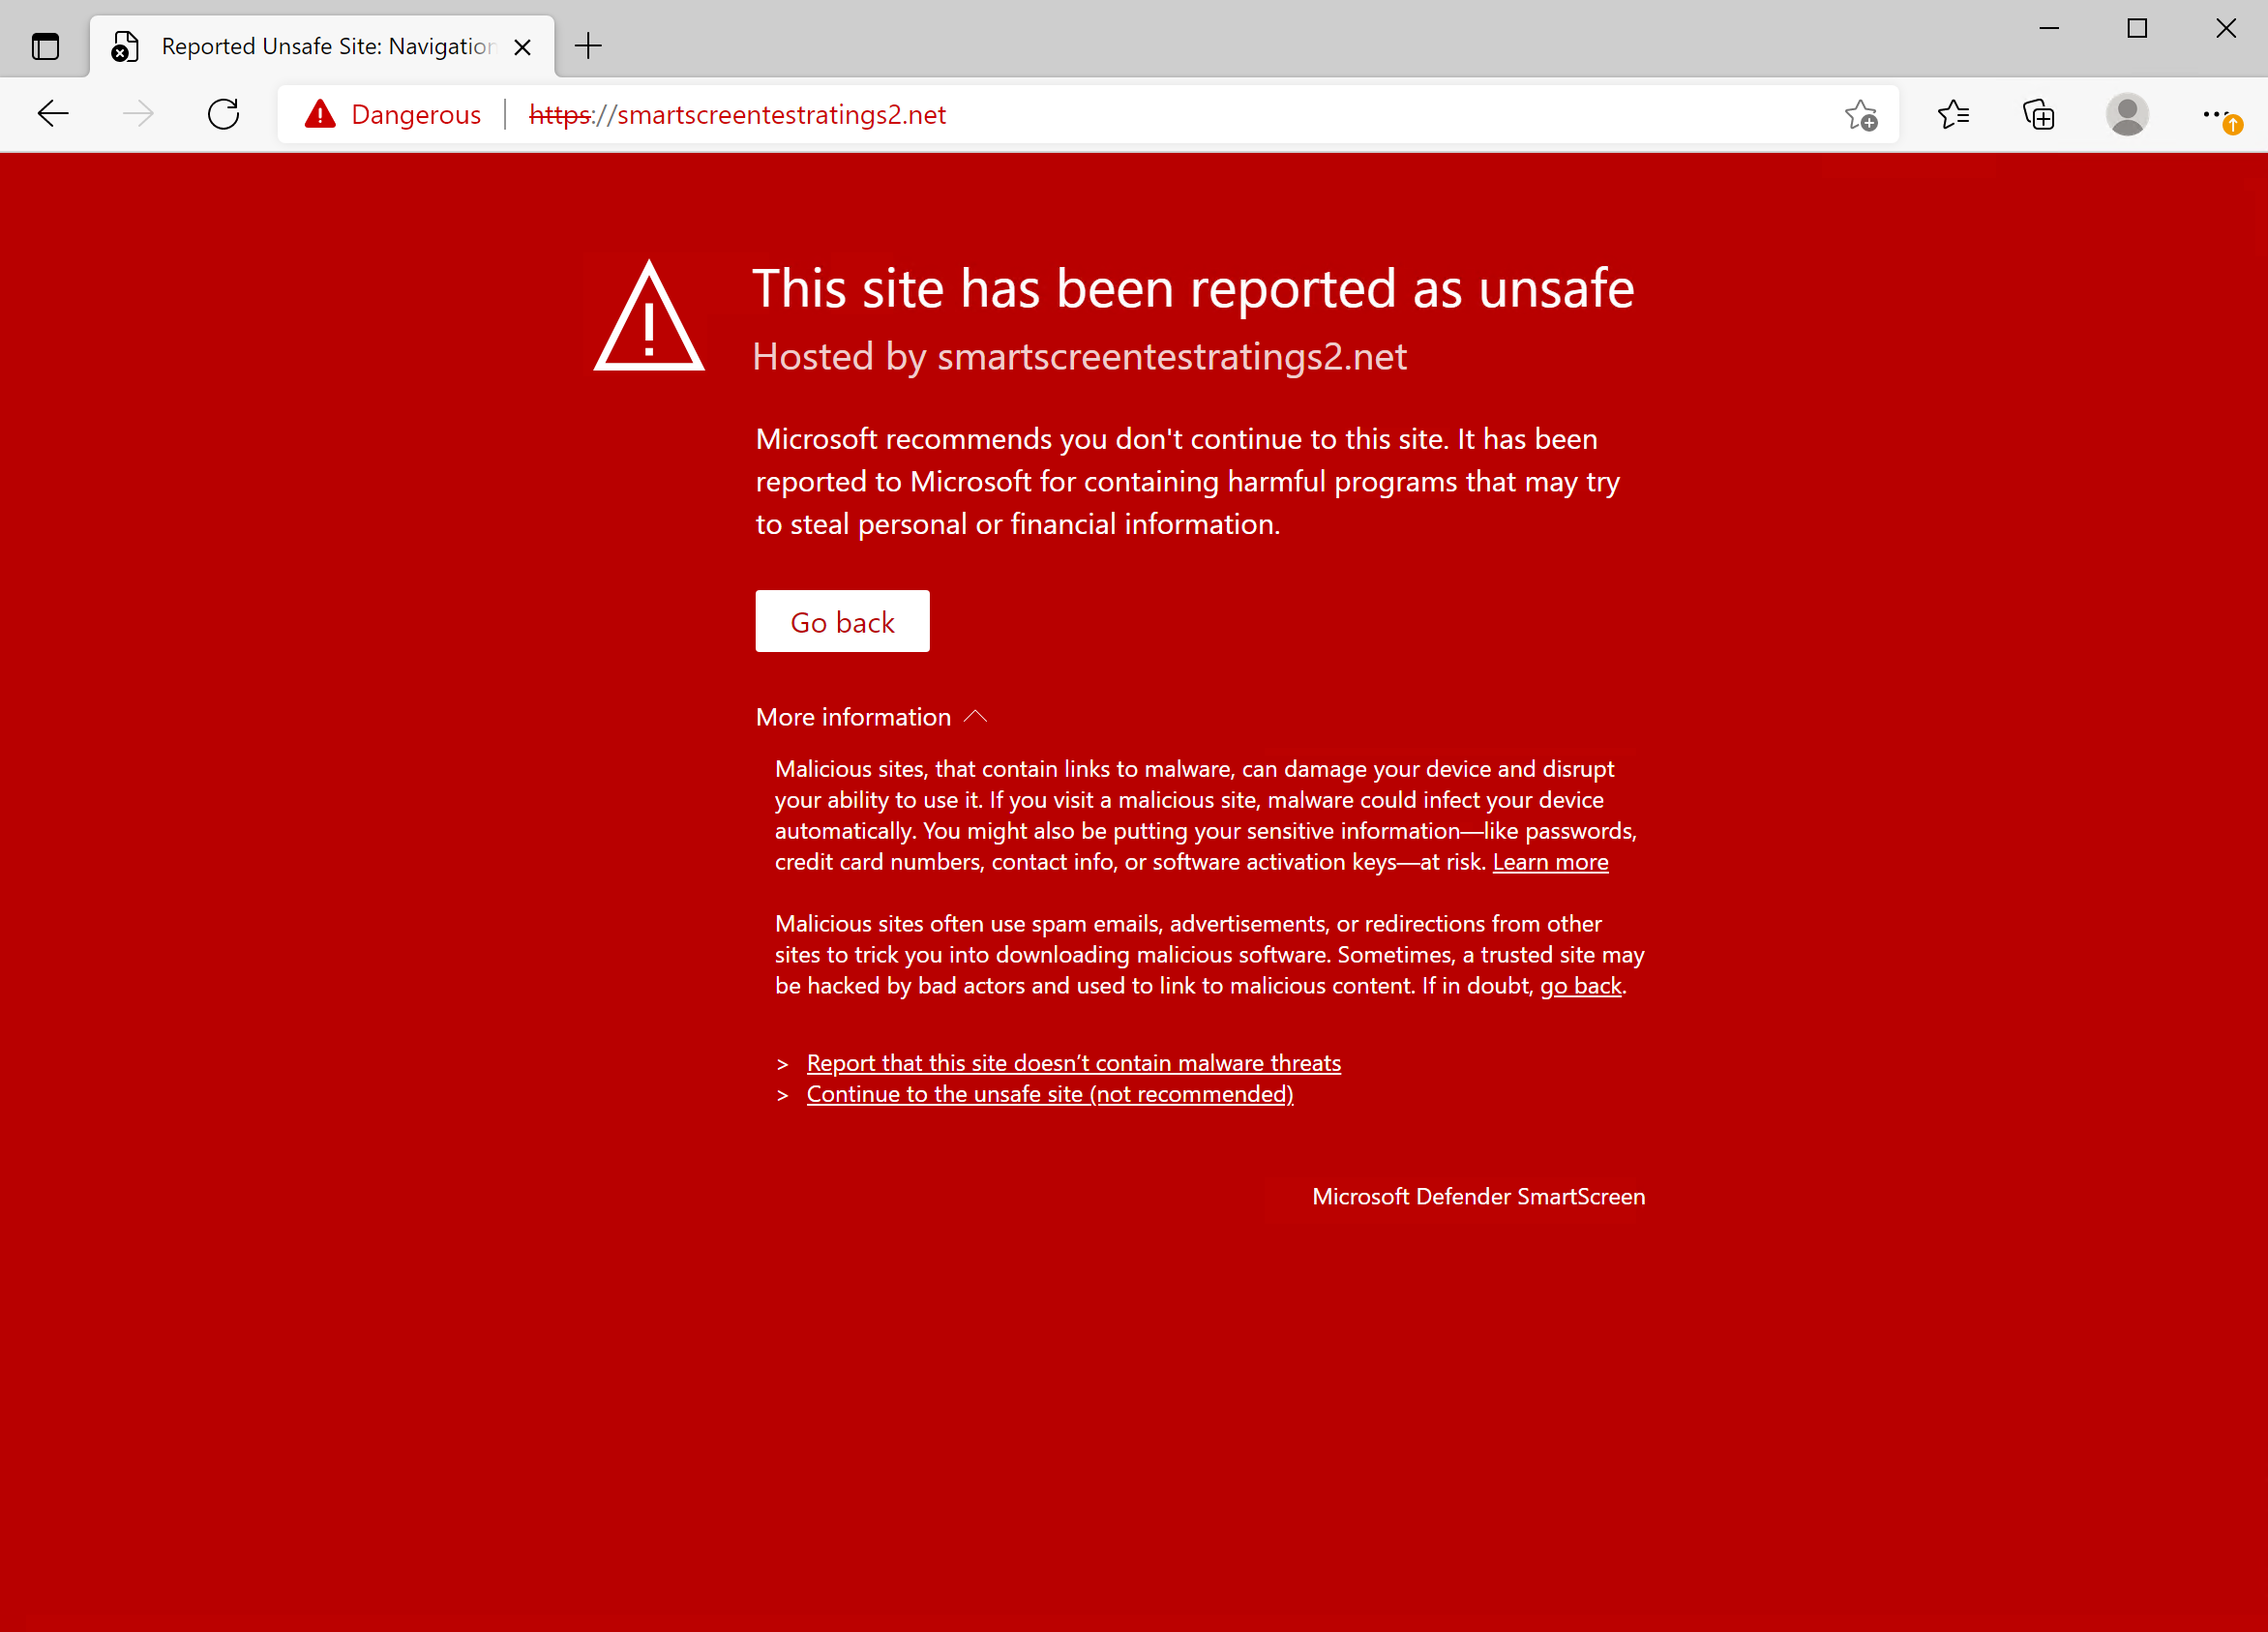 Page blocked by Microsoft Edge.